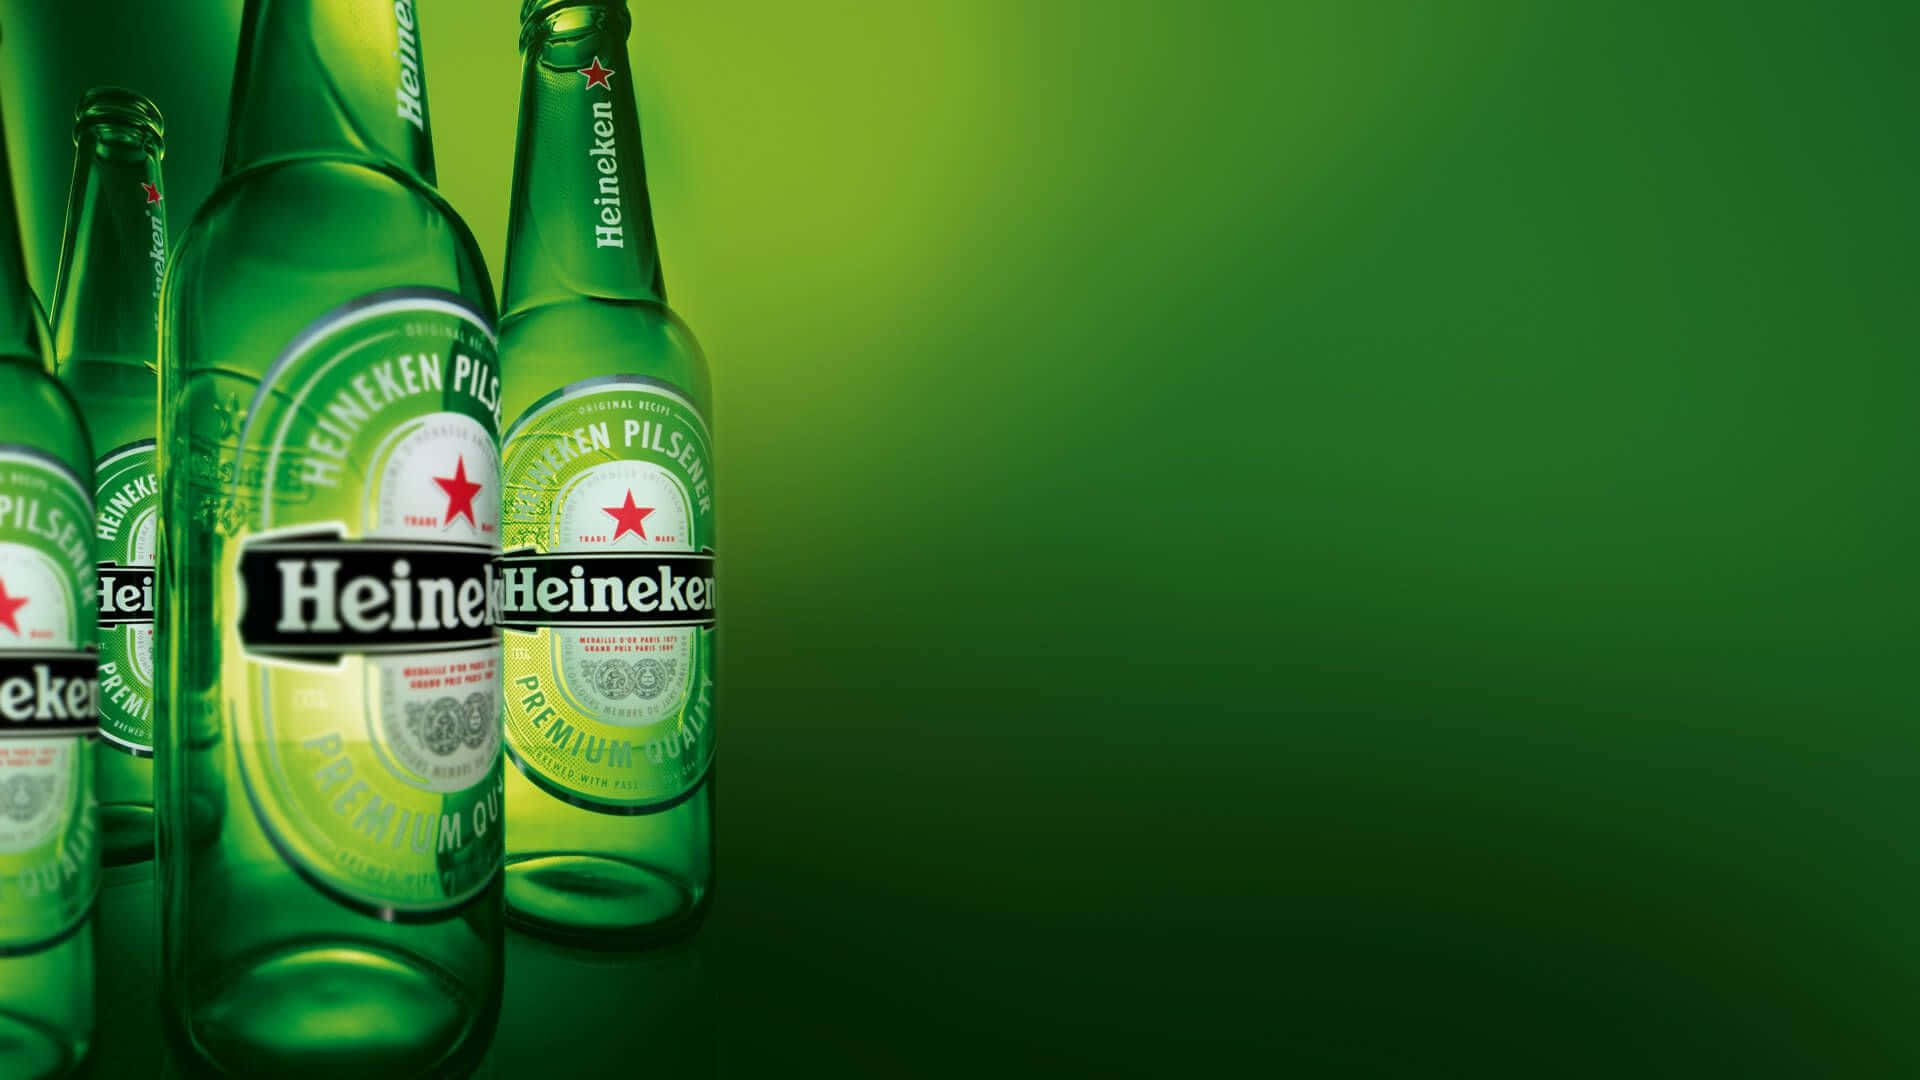 Cold Heineken Beers Lined Up on a Wooden Table